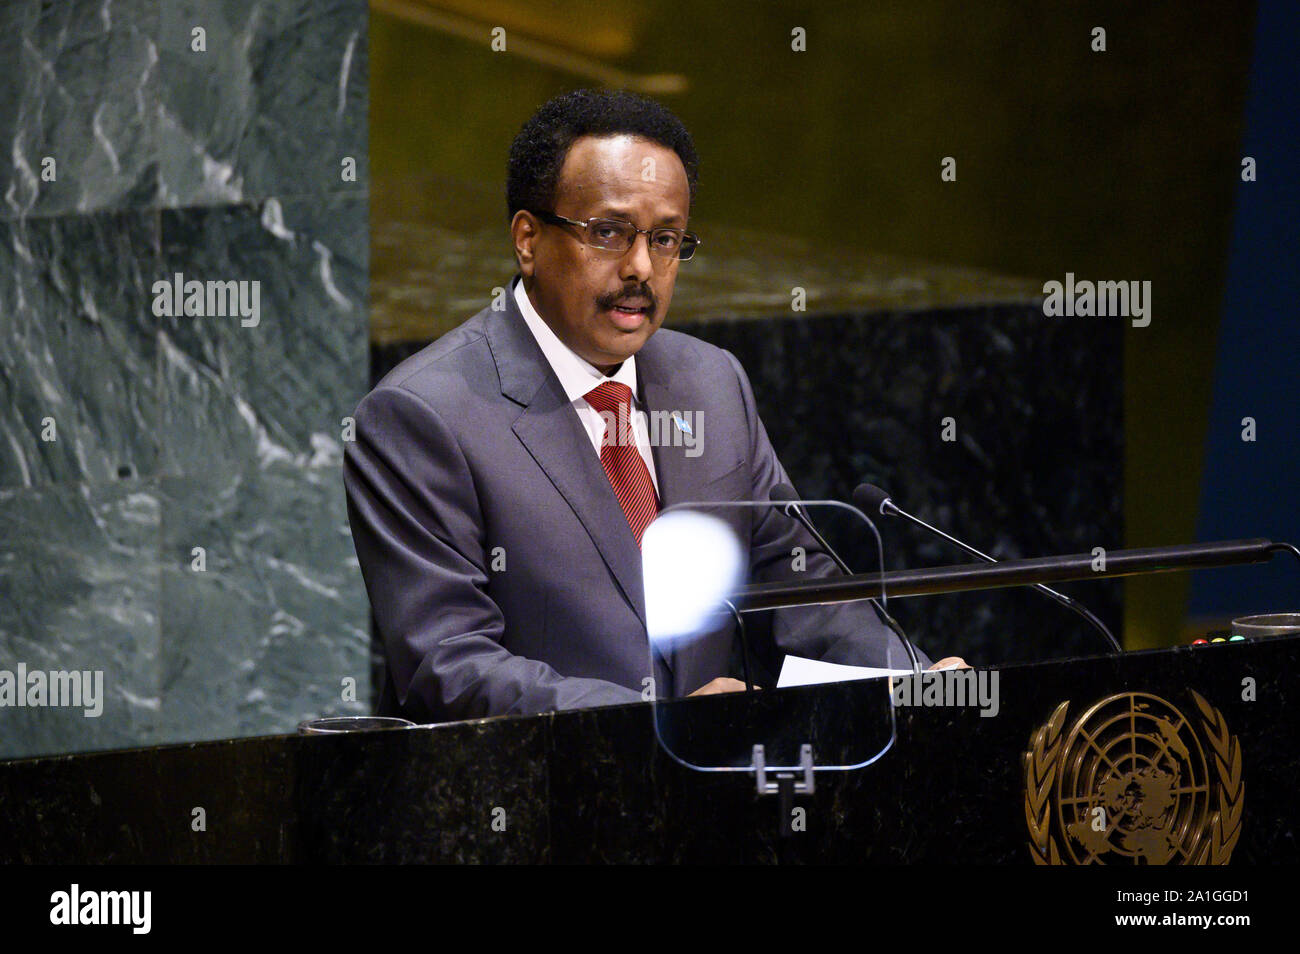 New York, NY, USA. 26th Sep, 2019. September 26, 2019 - New York, NY, United States: MOHAMED ABDULLAHI MOHAMED FARMAJO, President of Somalia, speaking at the General Assembly at the United Nations. Credit: Michael Brochstein/ZUMA Wire/Alamy Live News Stock Photo